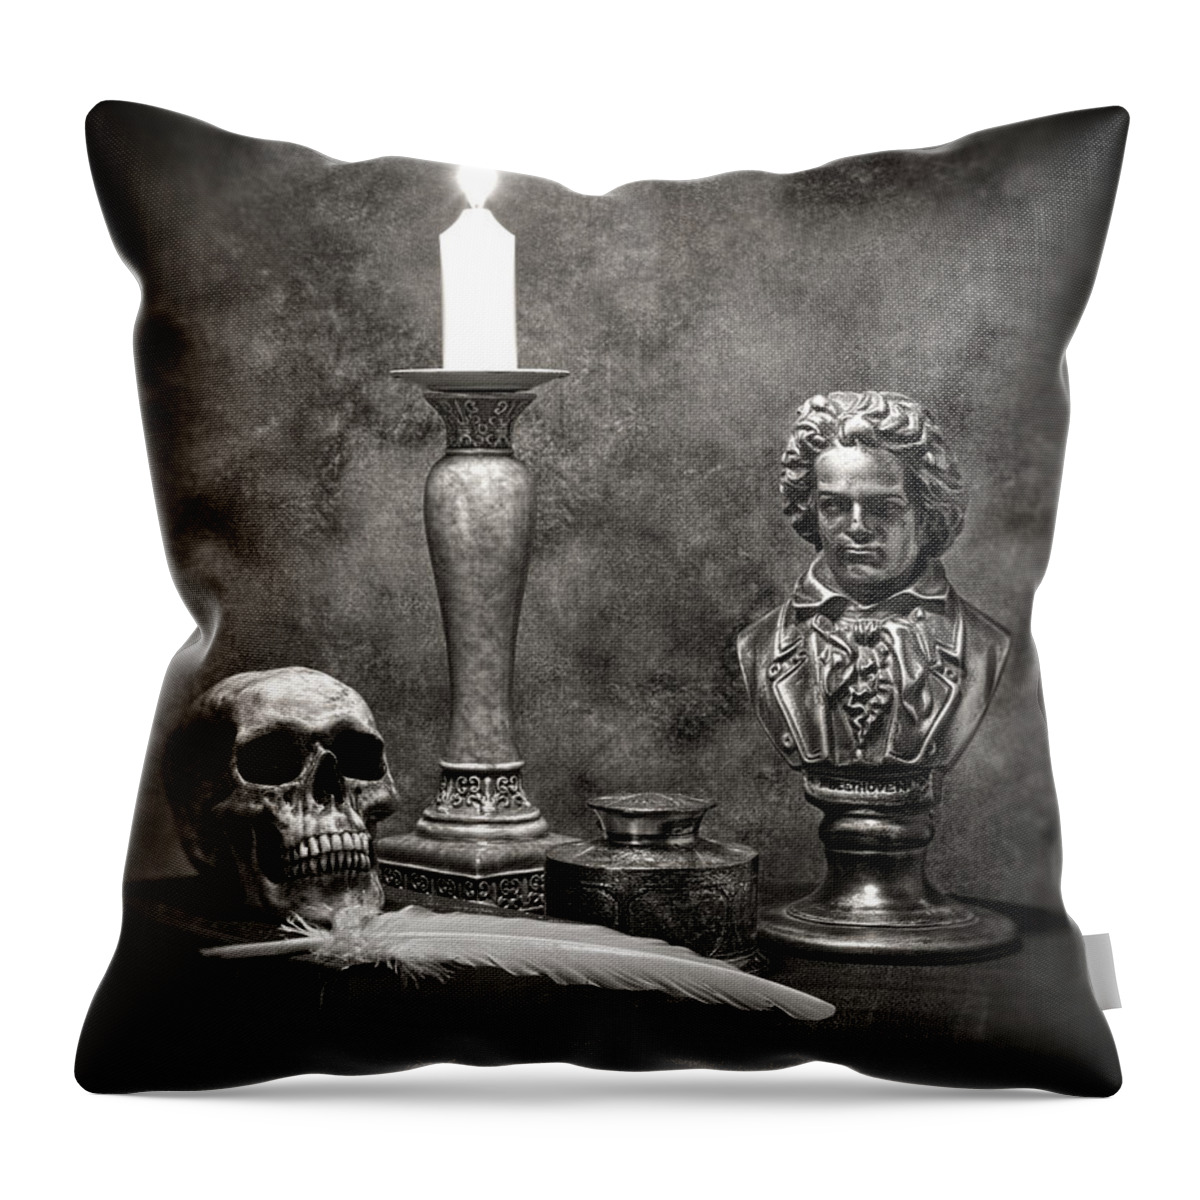 Musician Throw Pillow featuring the photograph Beethoven Still Life by Tom Mc Nemar